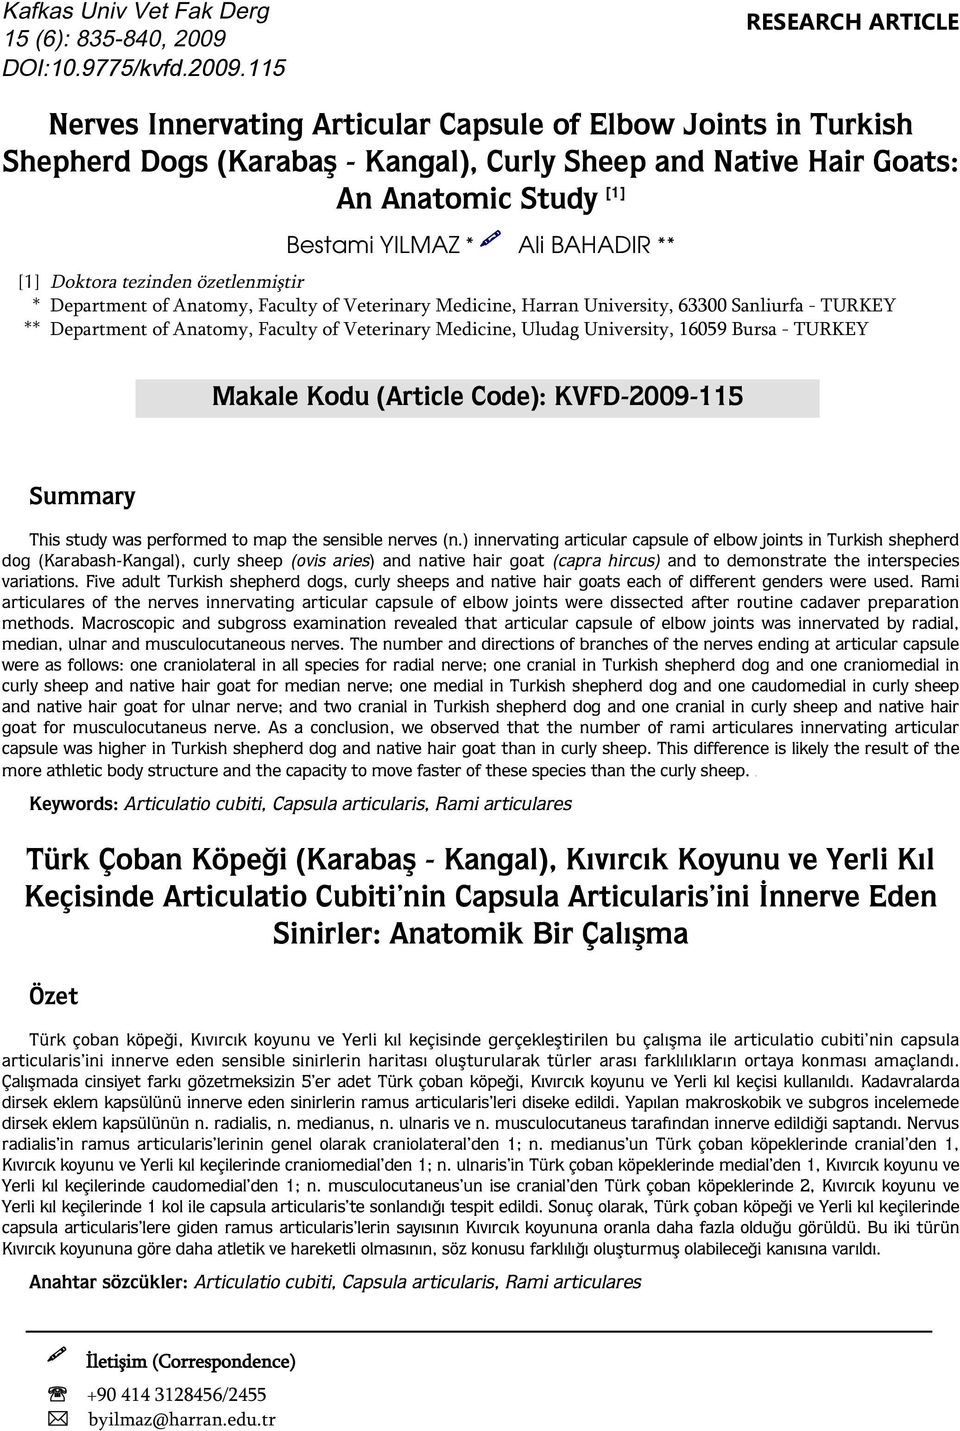 115 RESEARCH ARTICE Nerves Innervating Articular Capsule of Elbow Joints in Turkish Shepherd Dogs (Karabaş - Kangal), Curly Sheep and Native Hair Goats: An Anatomic Study [1] Bestami YIMAZ * Ali